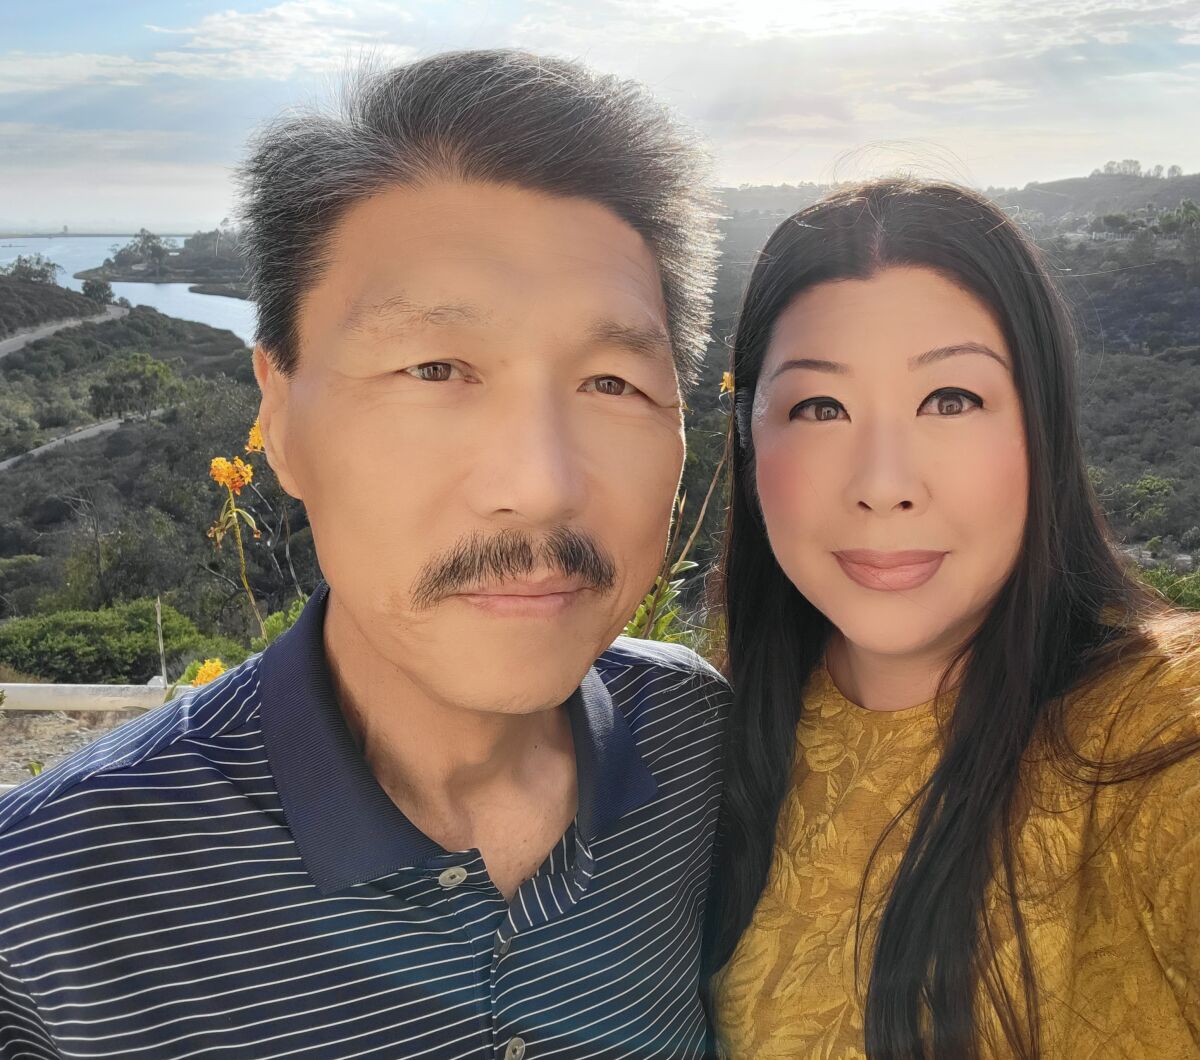 Nancy Kim, pictured with her father, Il Hyung Kim